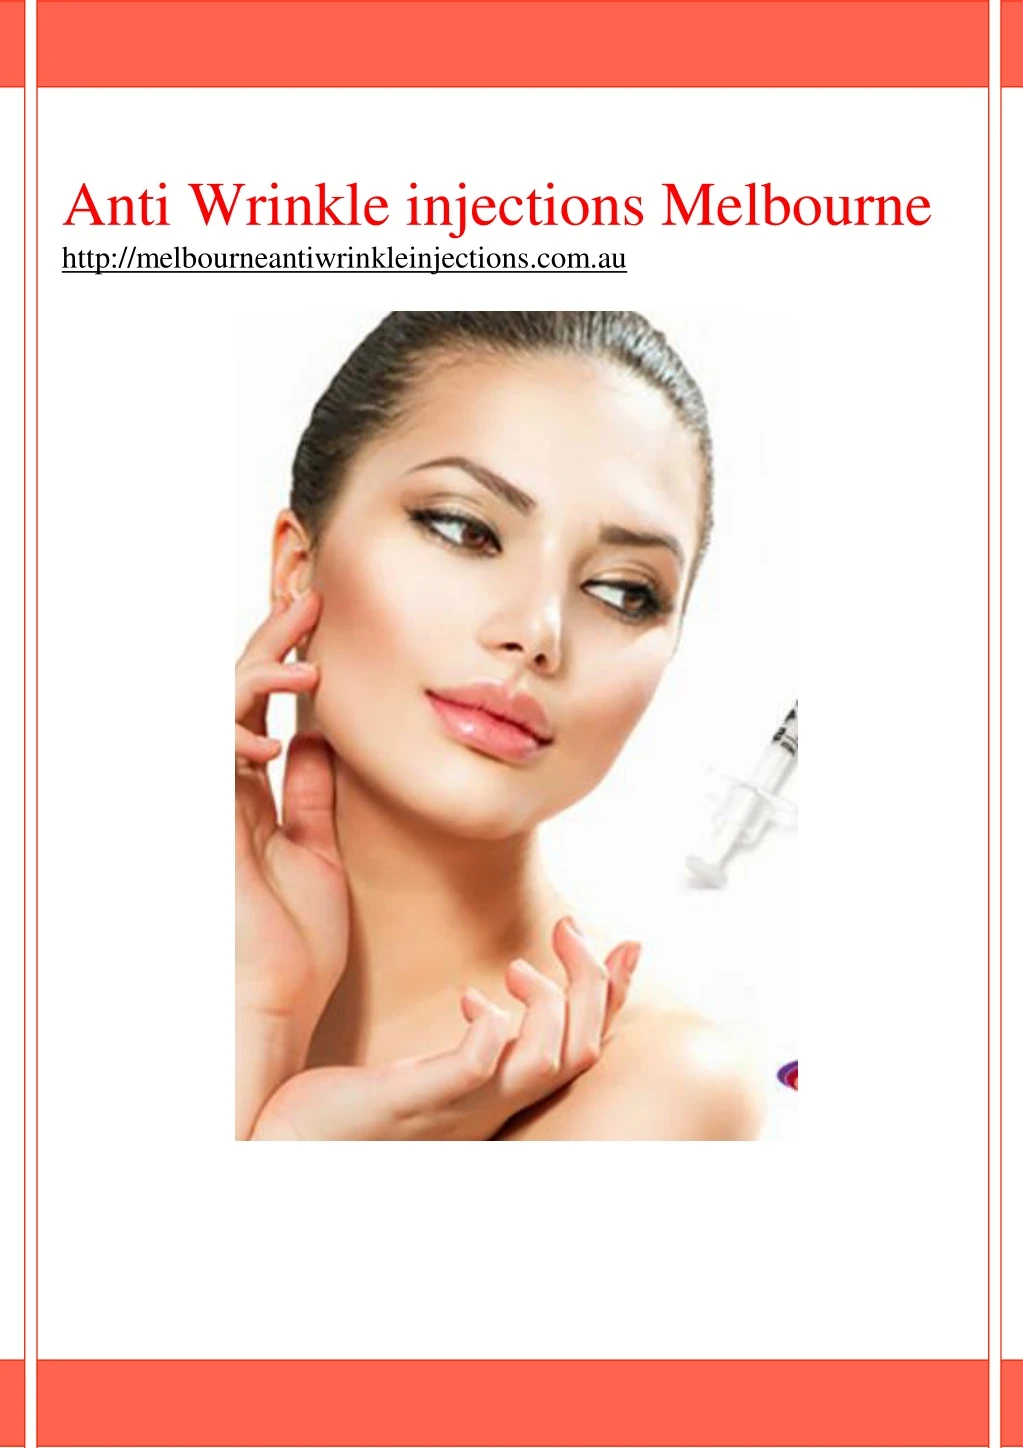 anti wrinkle injections melbourne http